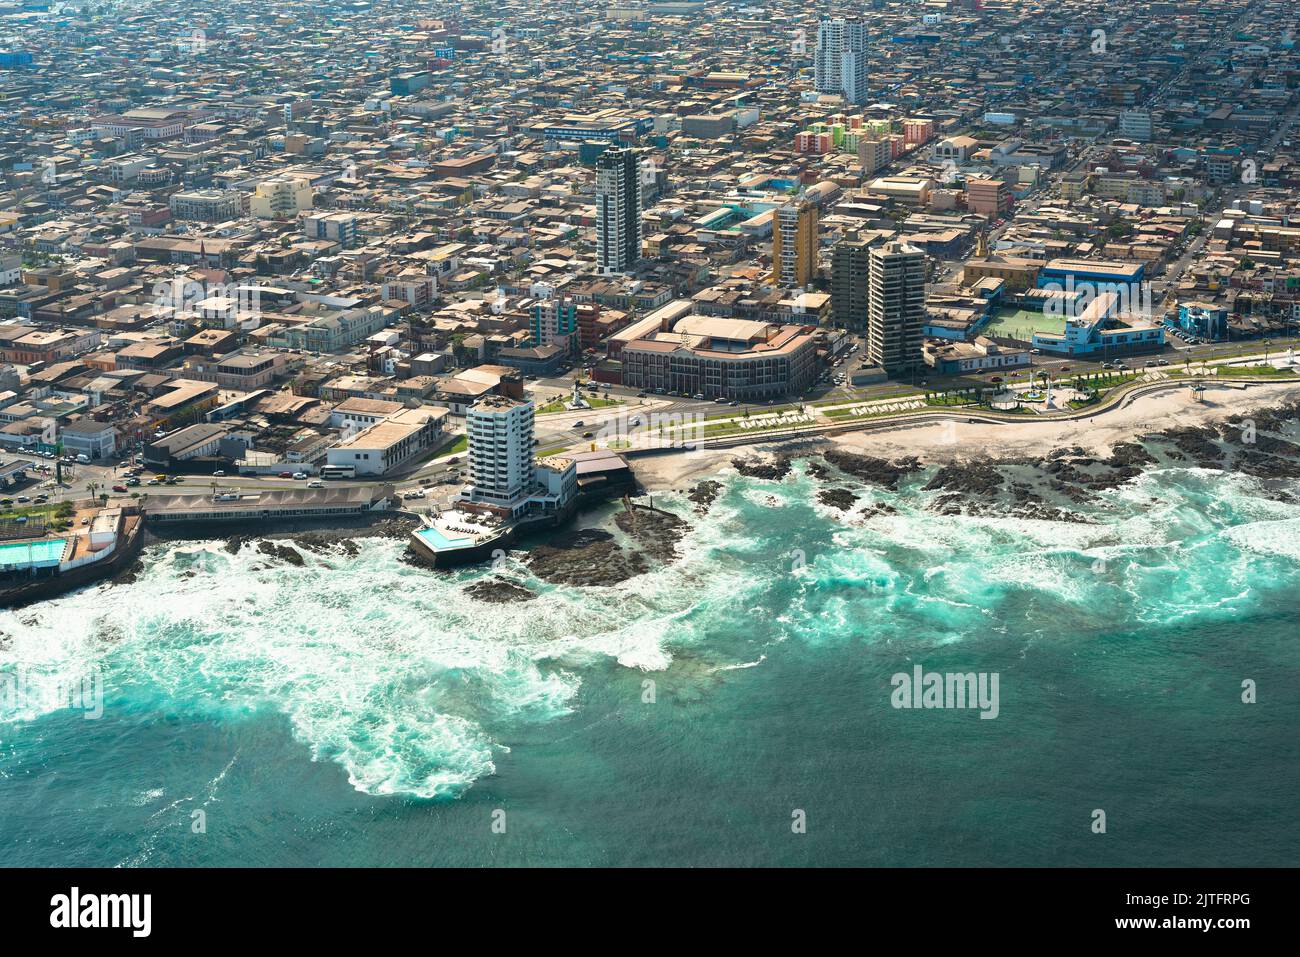 Aerial view of Iquique in northern Chile Stock Photo